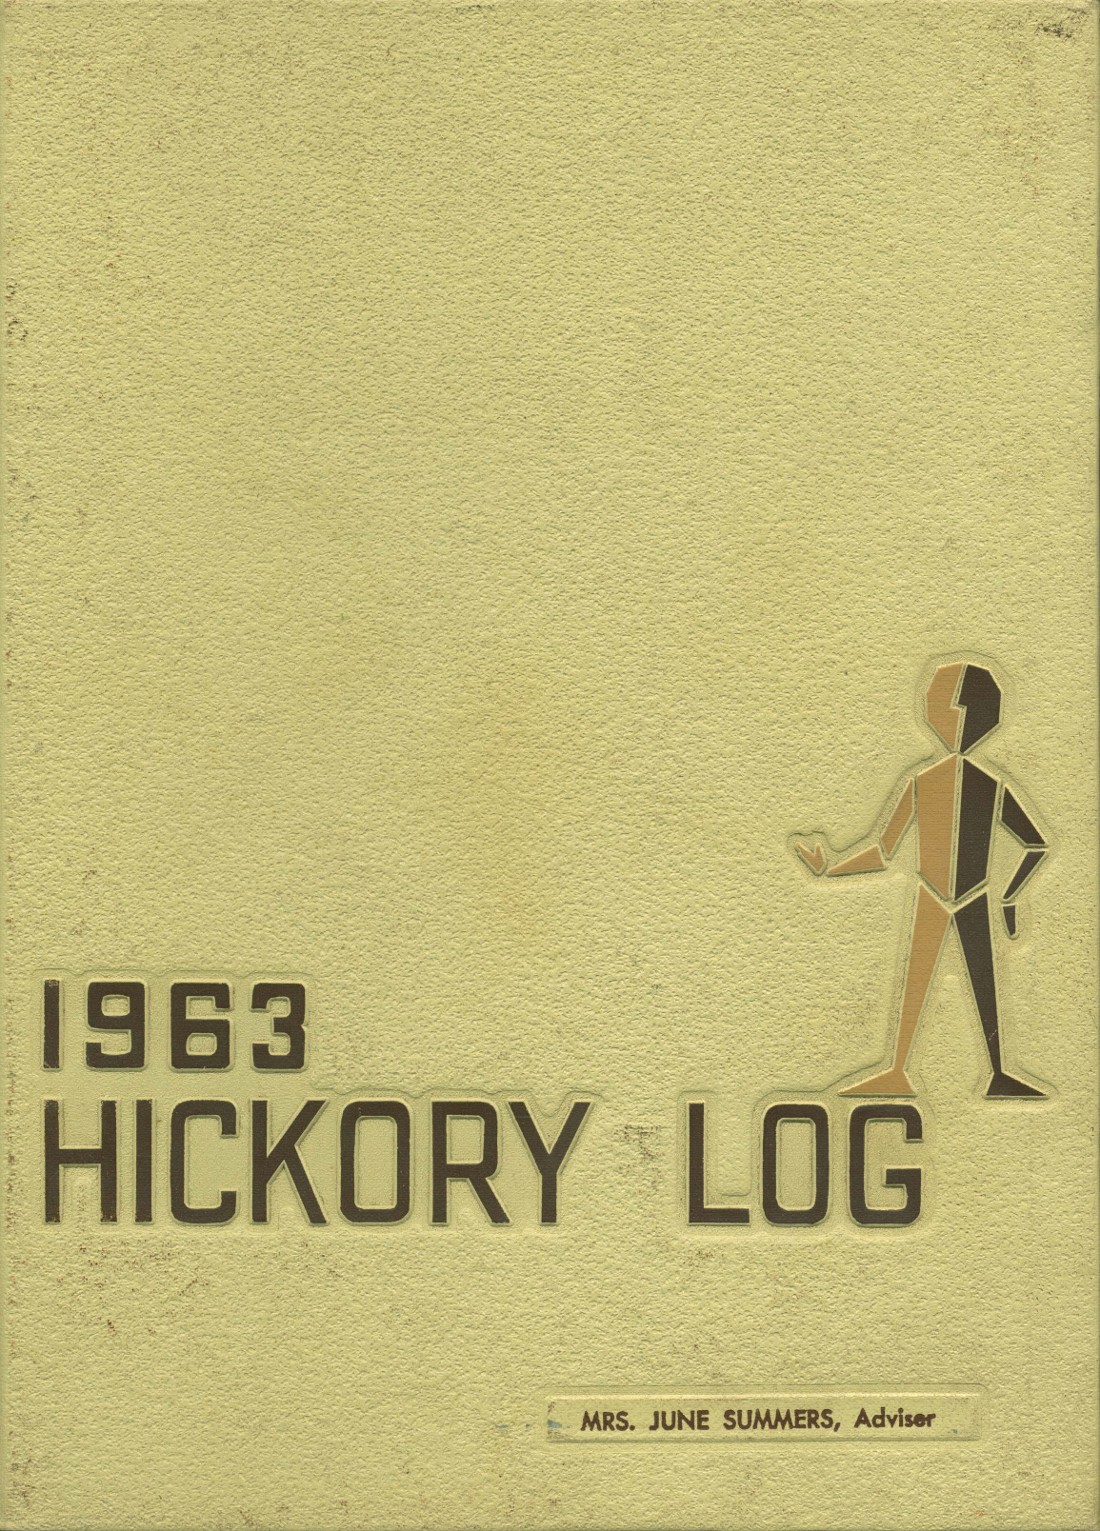 1963 yearbook from Hickory High School from Hickory, North Carolina for